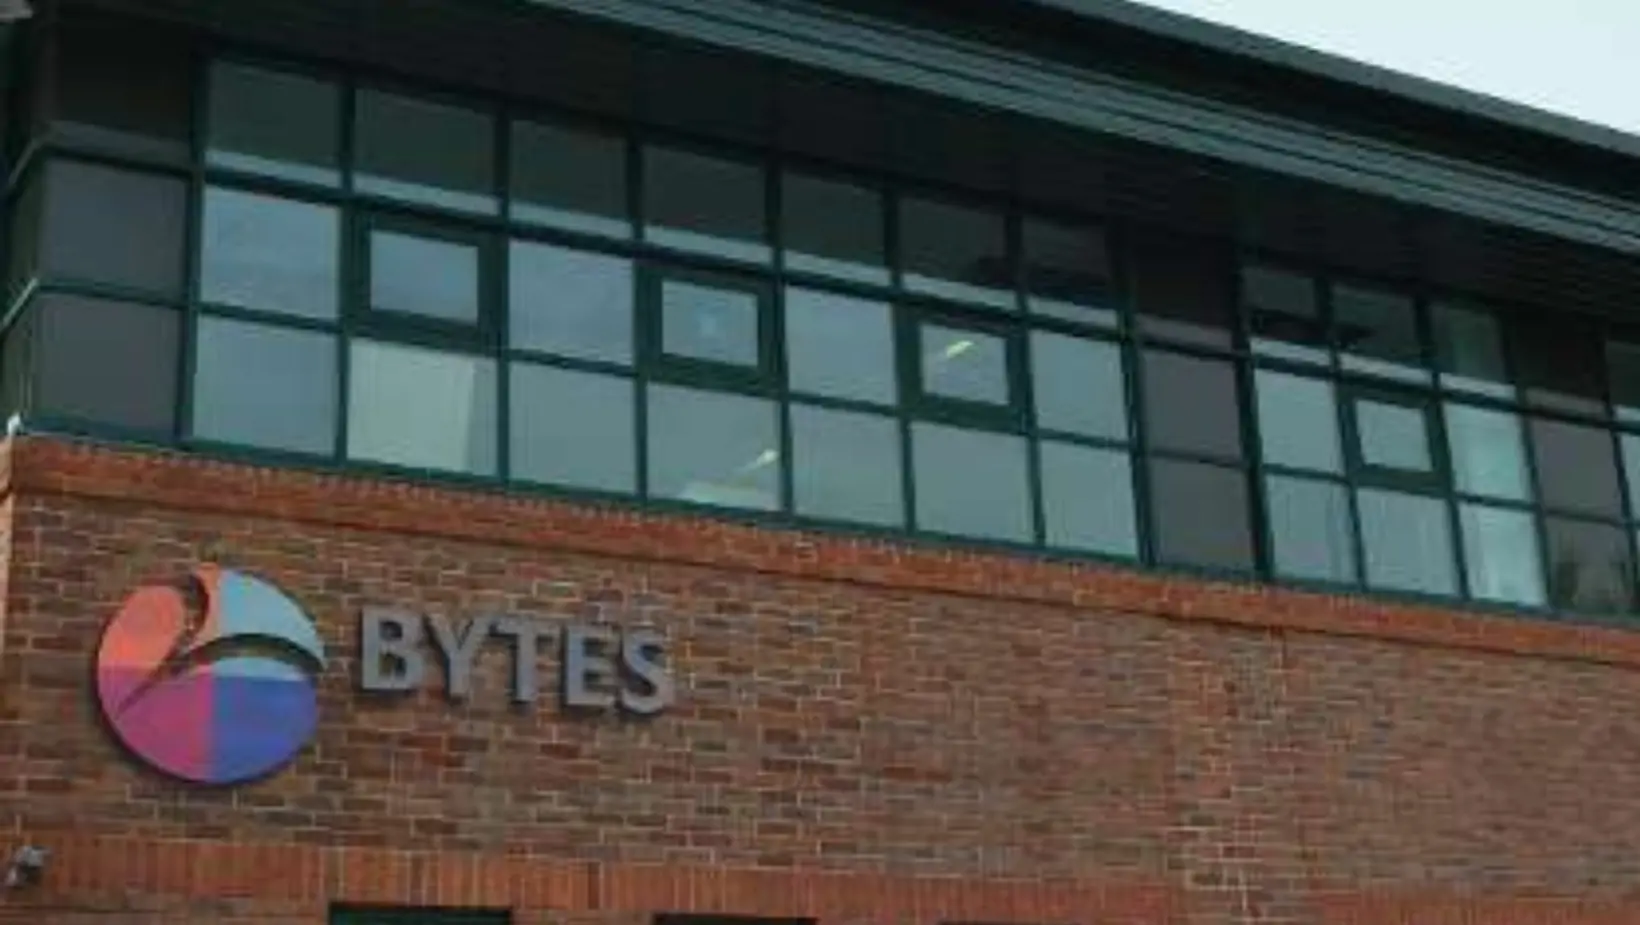 Bytes Technology Group plc: Investigating CEO Resignation and Undisclosed Transactions